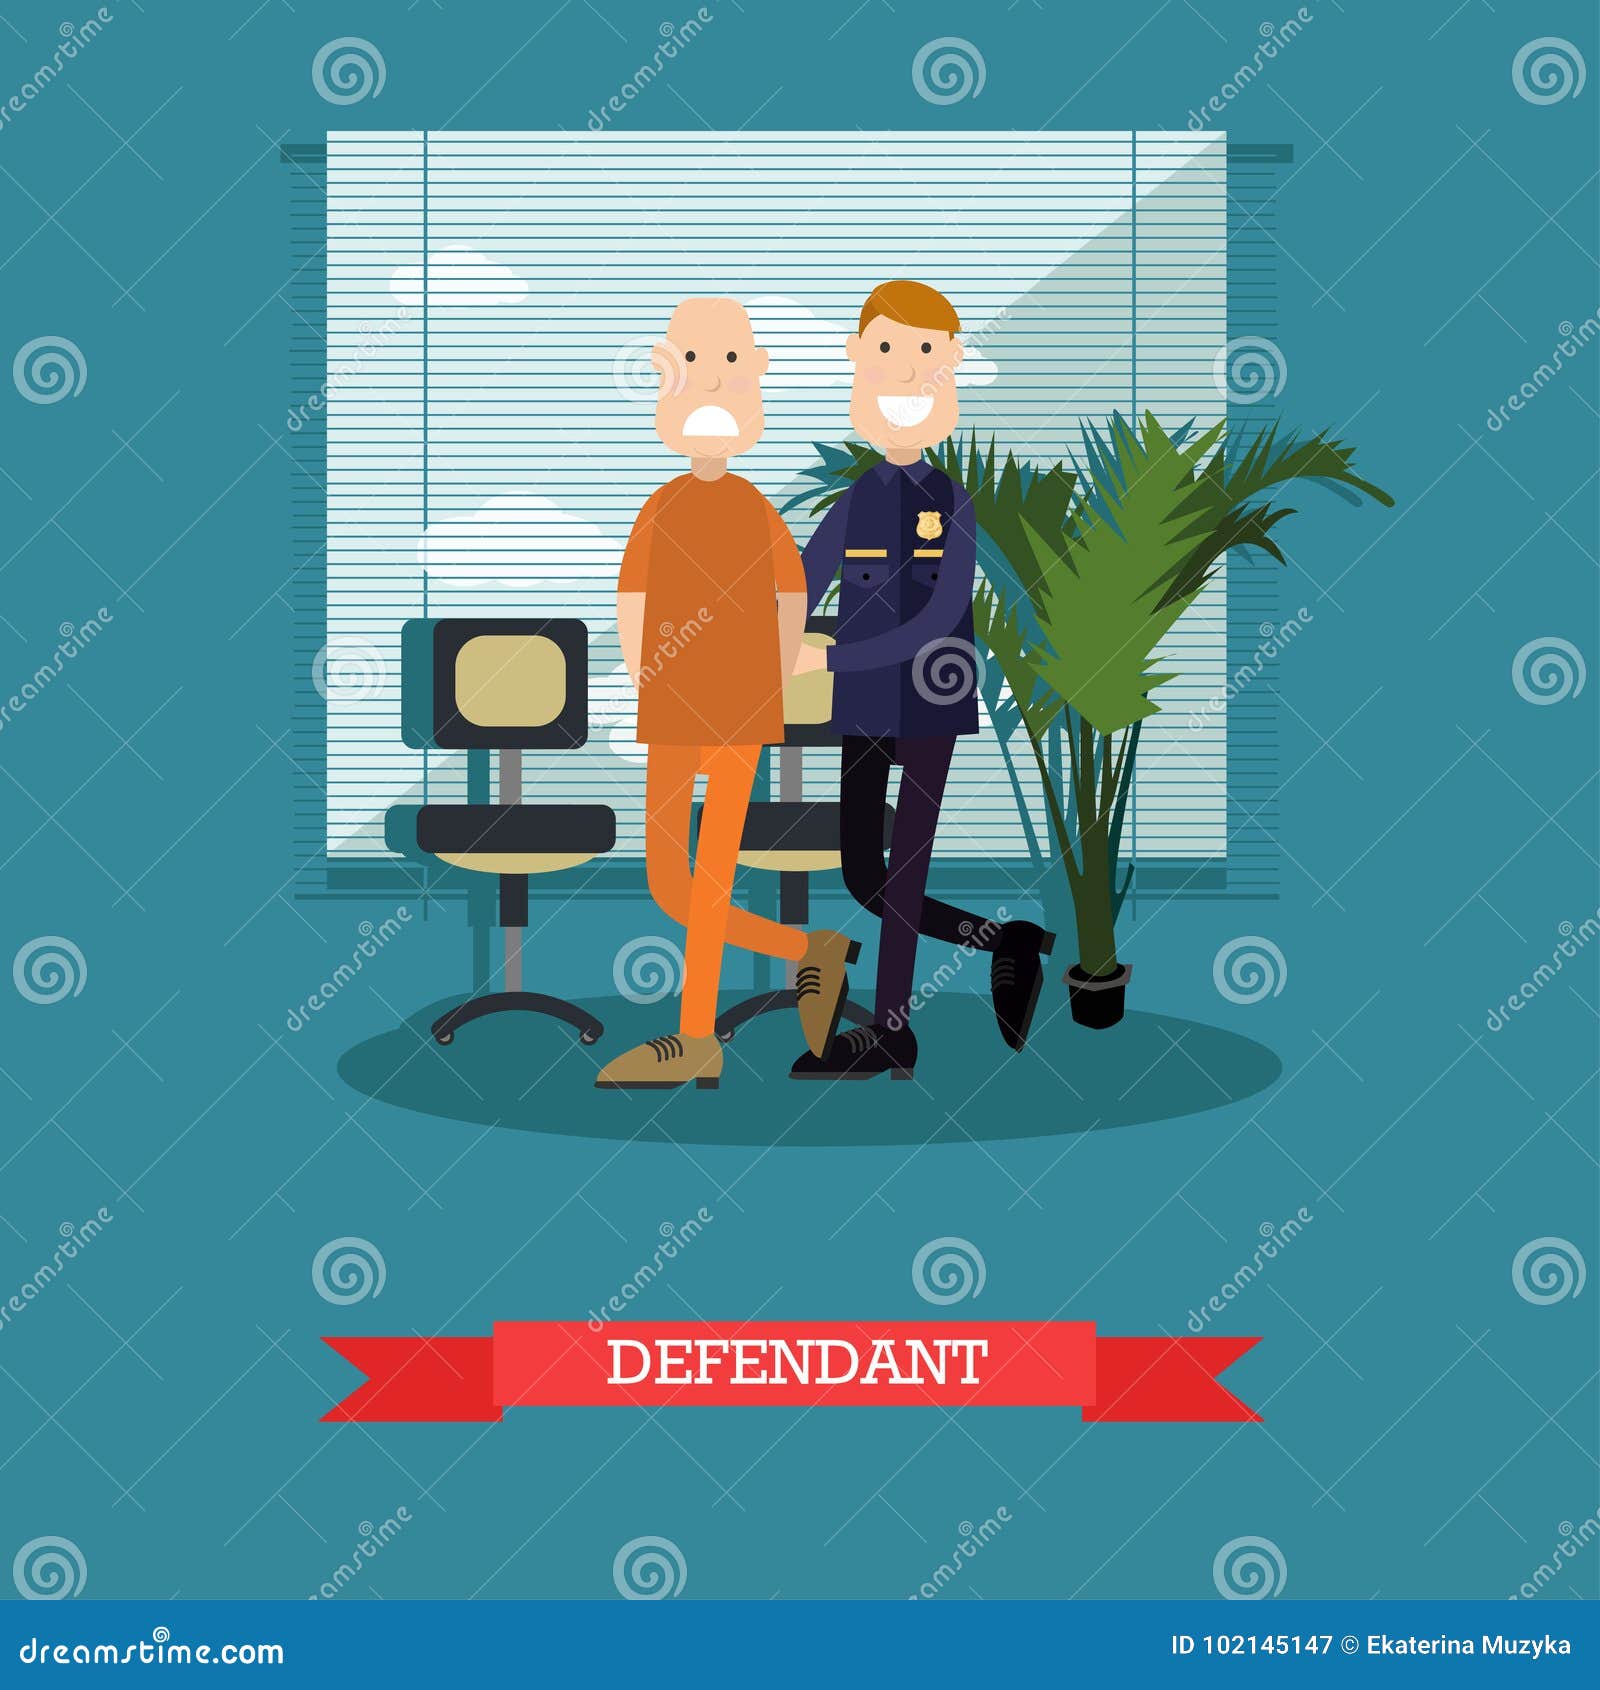 defendant   in flat style